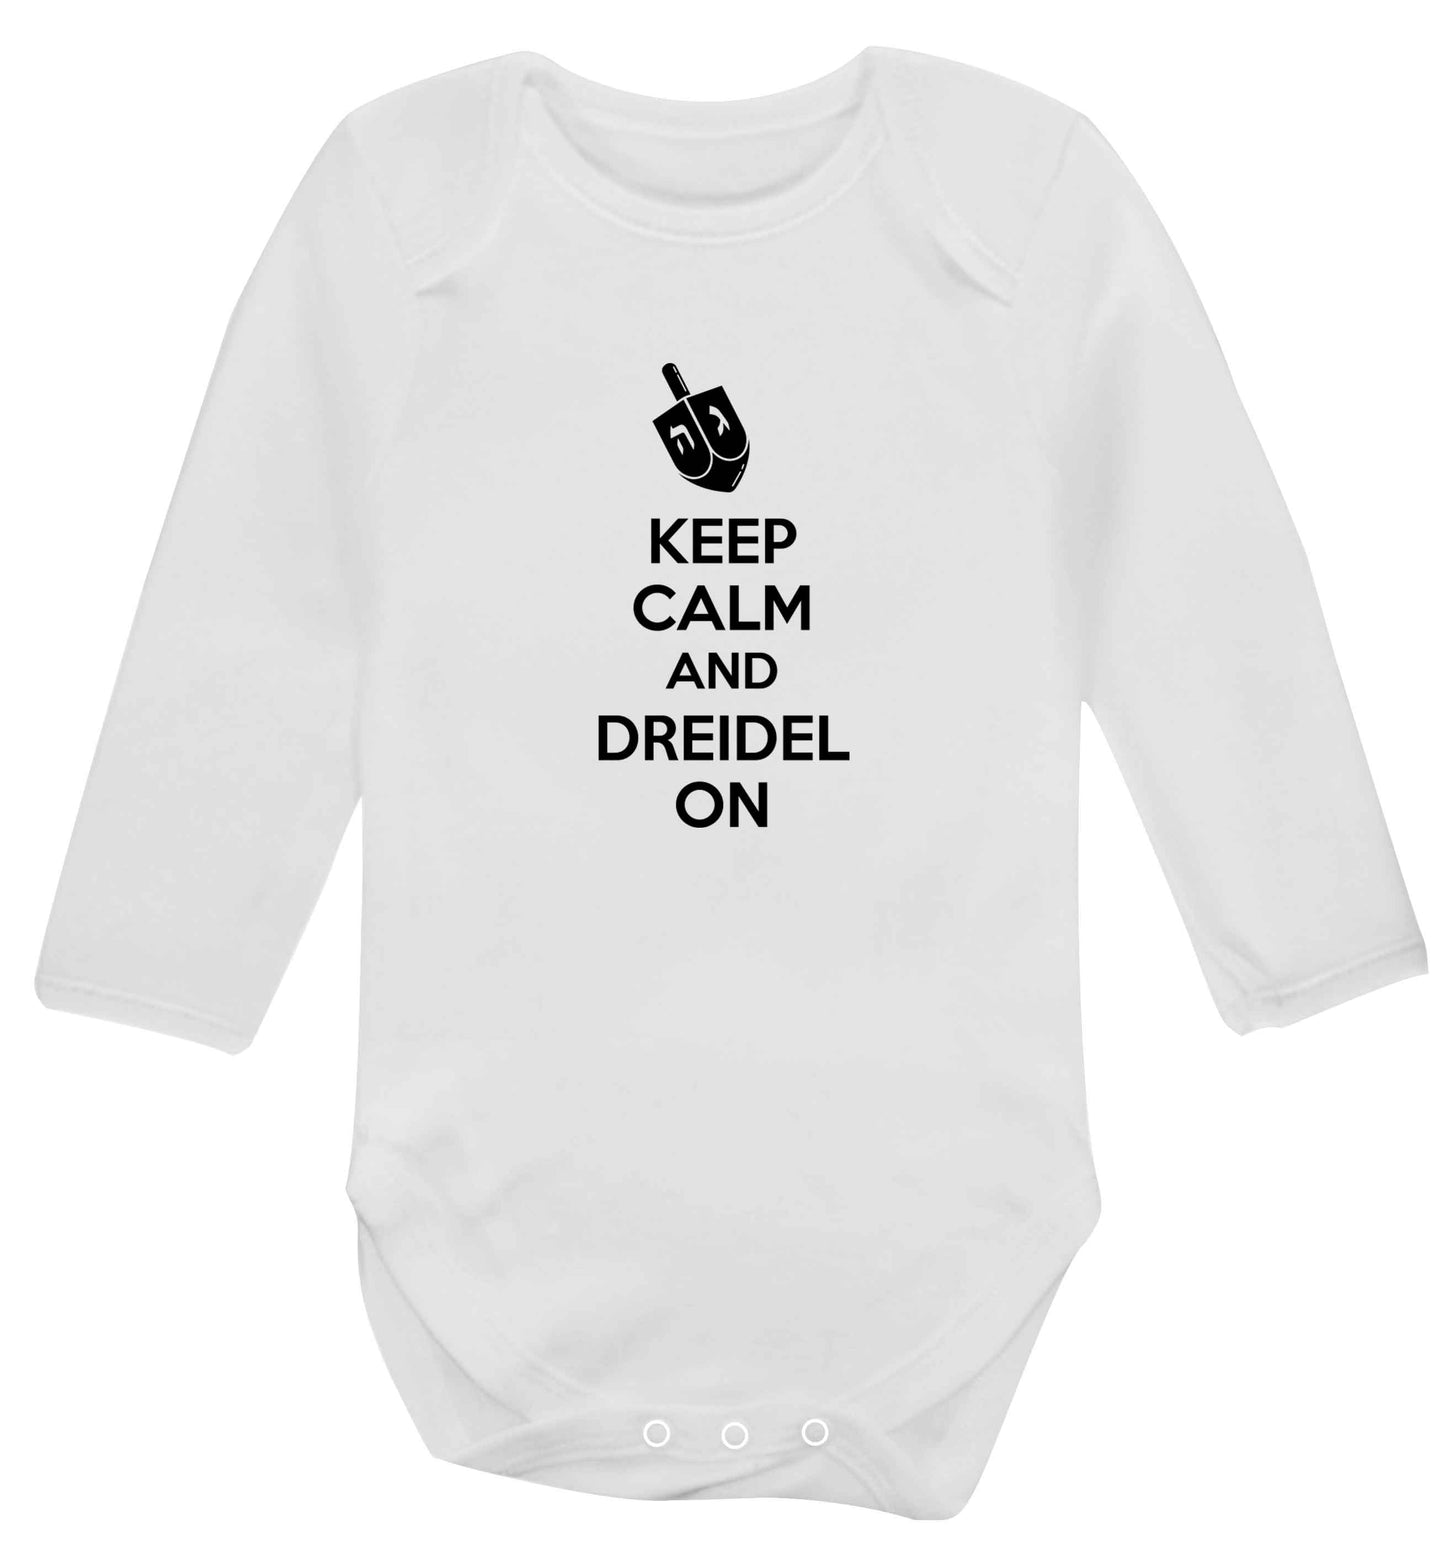 Keep calm and dreidel on baby vest long sleeved white 6-12 months